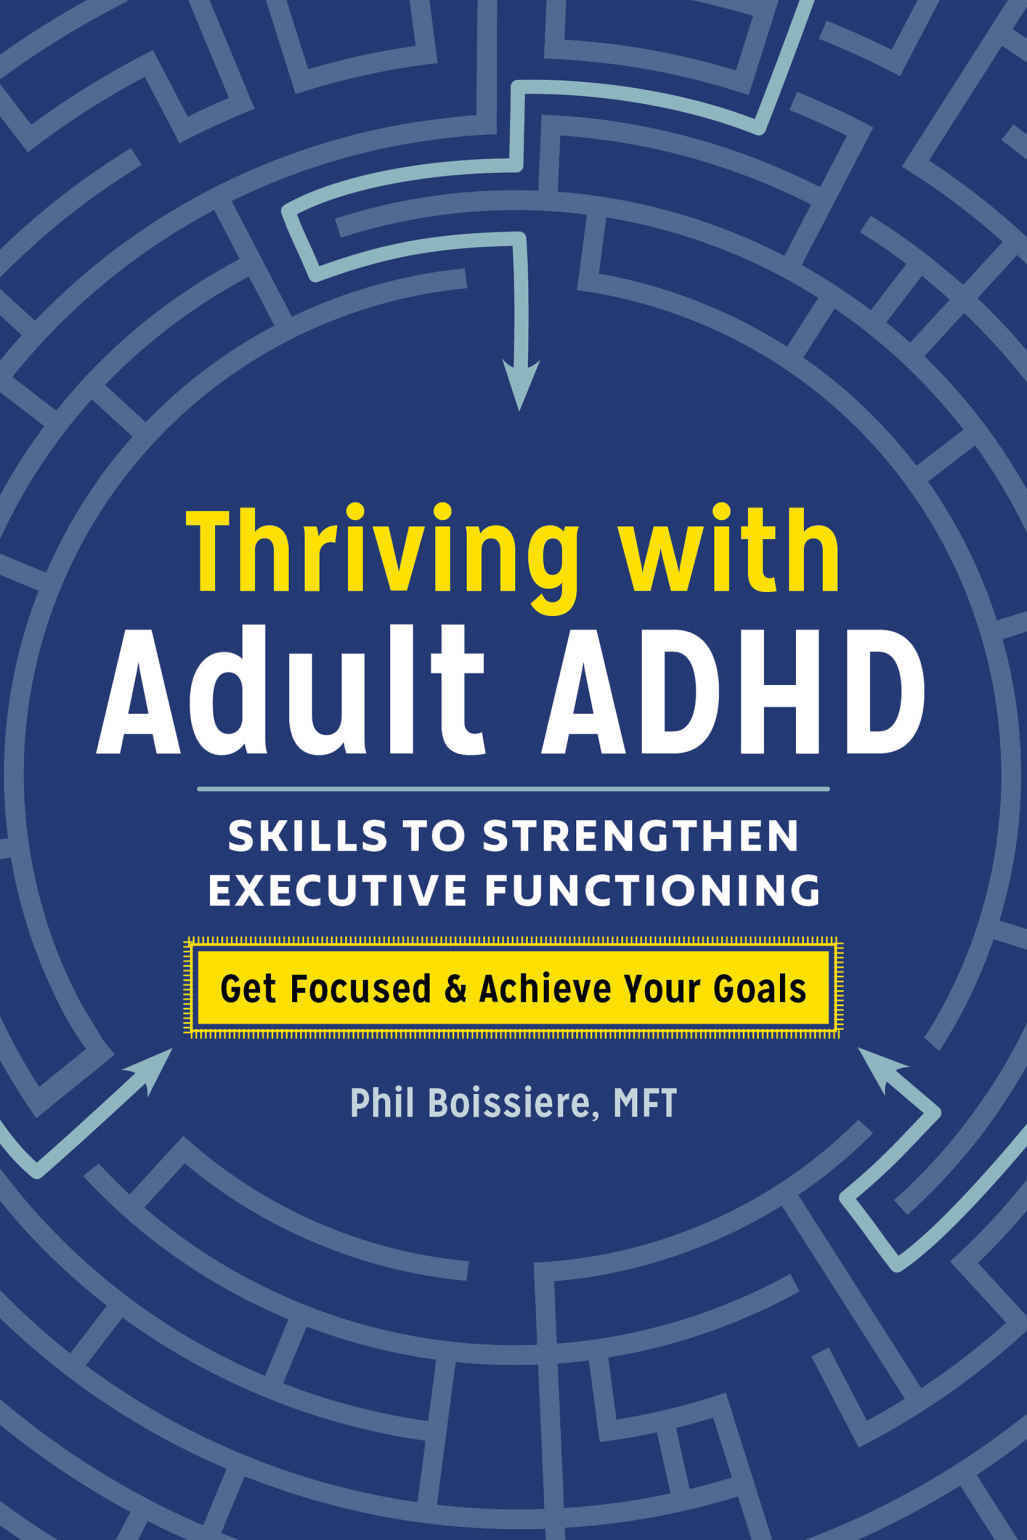 Thriving with Adult ADHD - Phil Boissiere